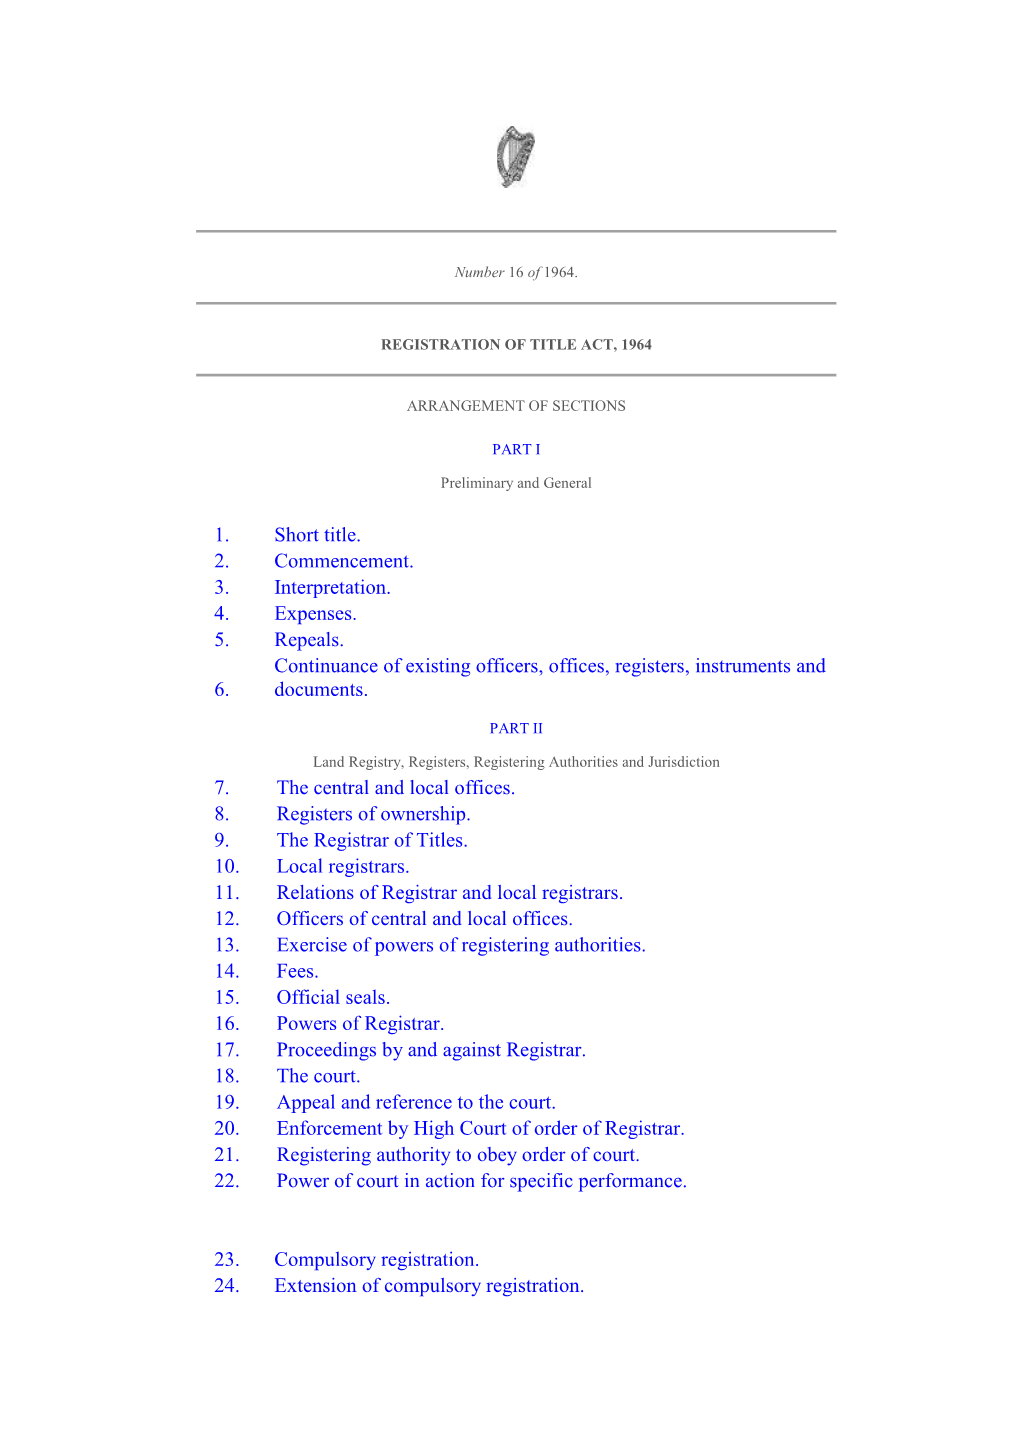 Registration of Title Act 1964